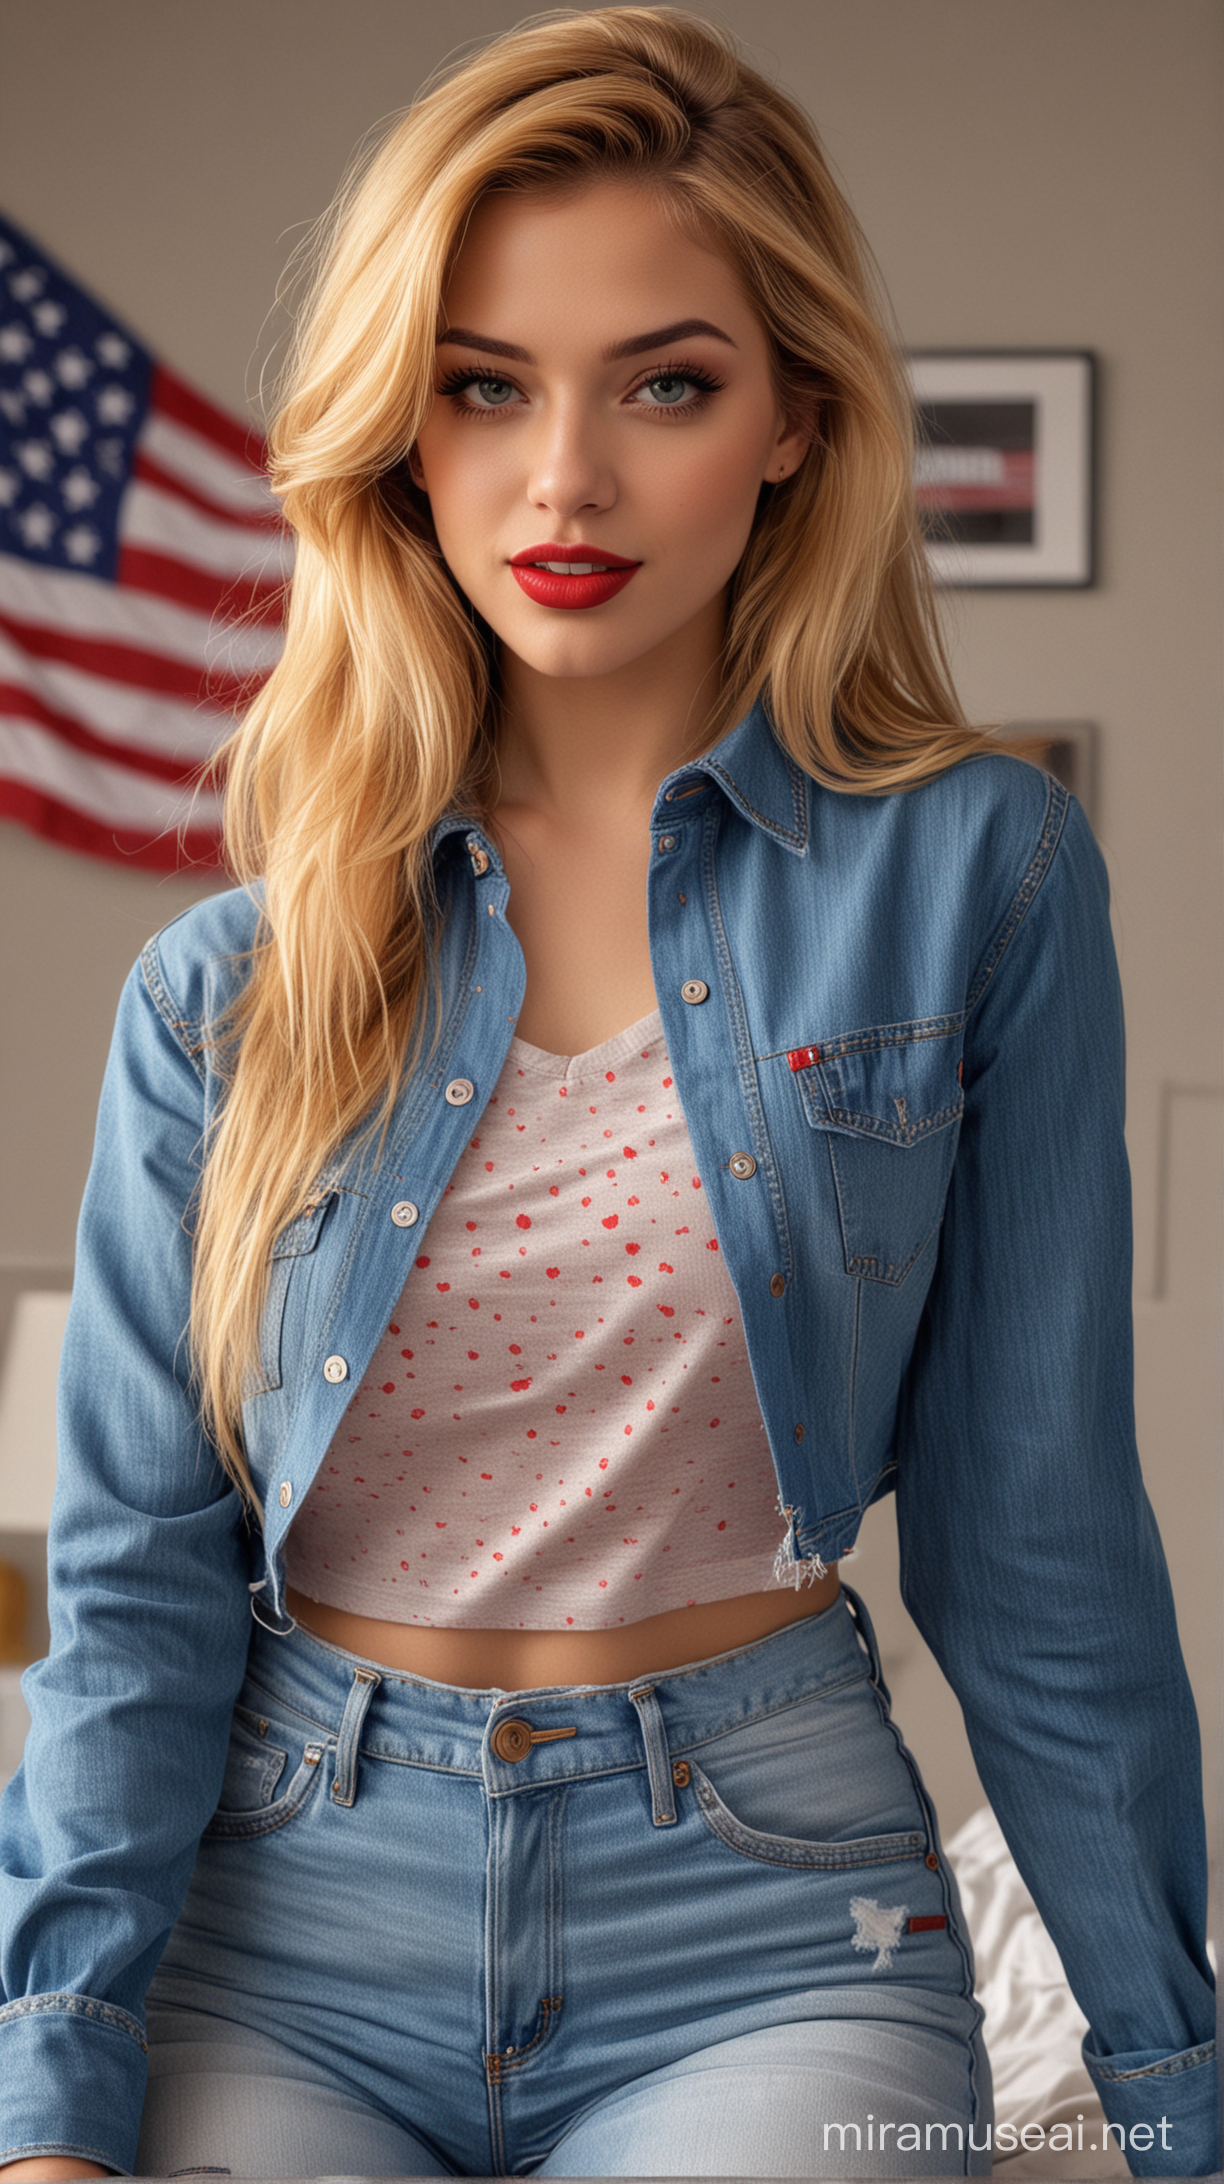 4k Ai art beautiful USA girl golden hair red lipstick ear tops blue jeans and half shirt six pack girl in USA home